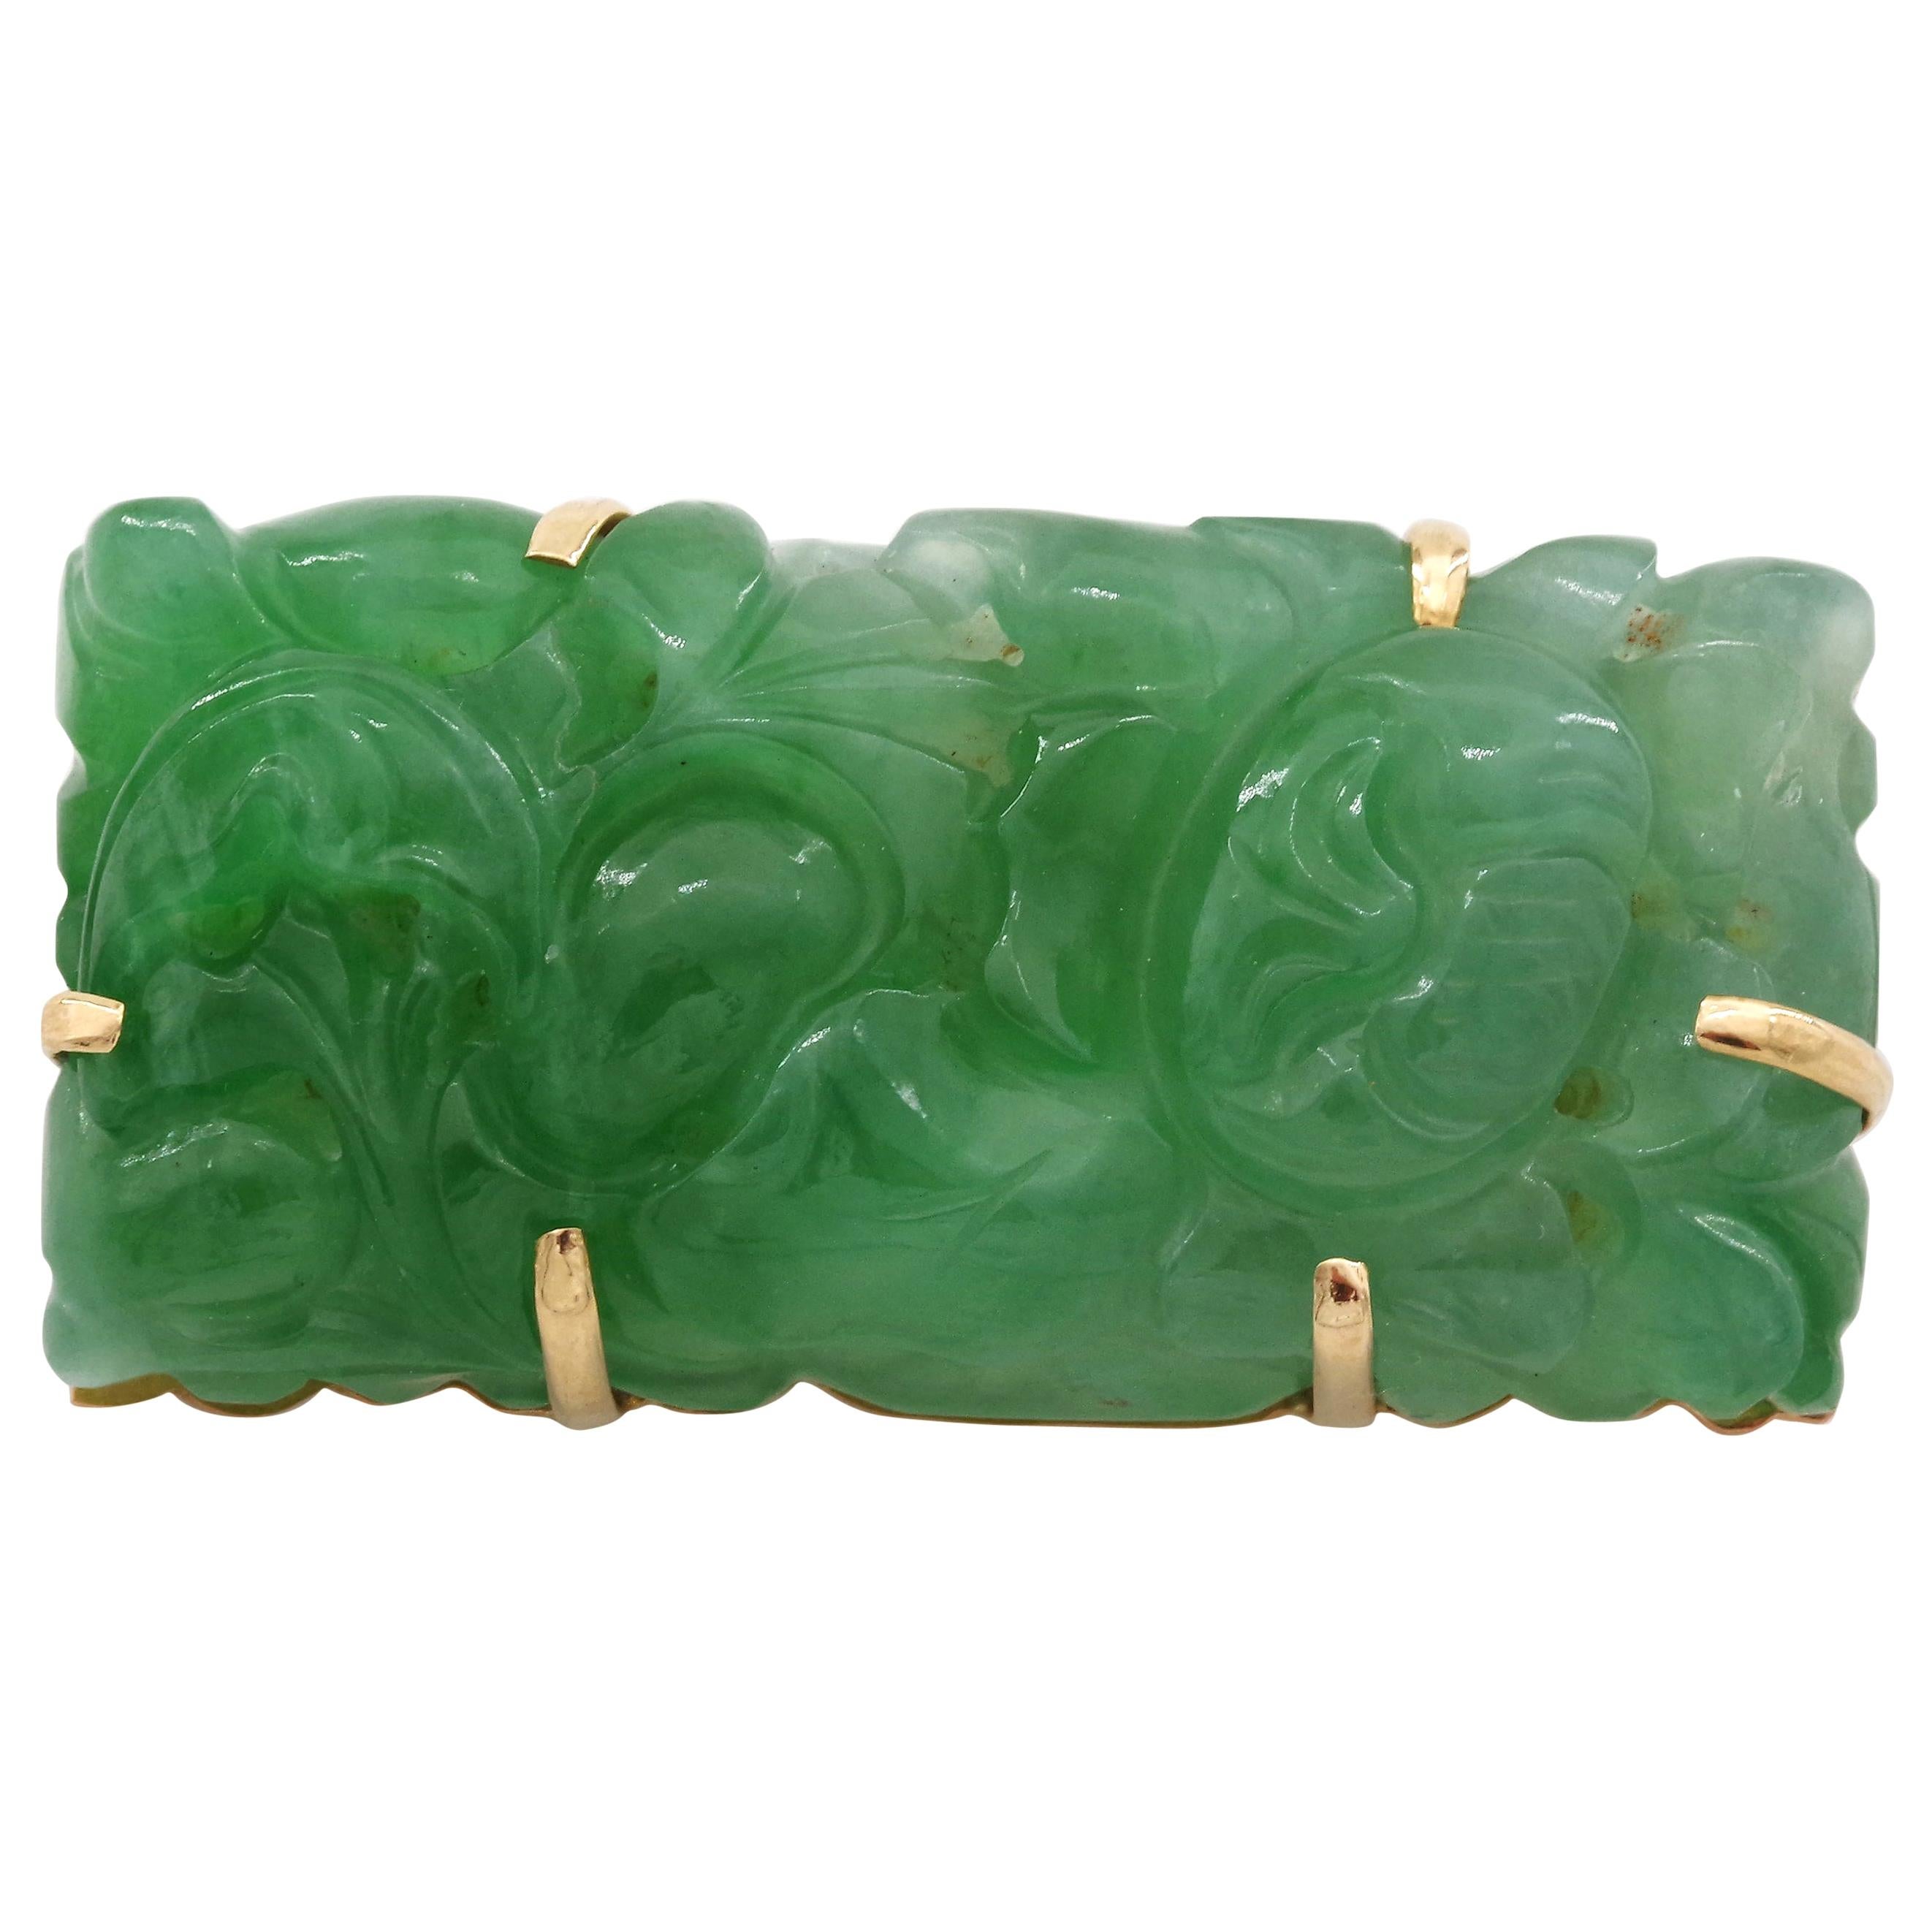 Art Deco Natural and Untreated Jade Brooch in Apple Green Singularly Spectacular